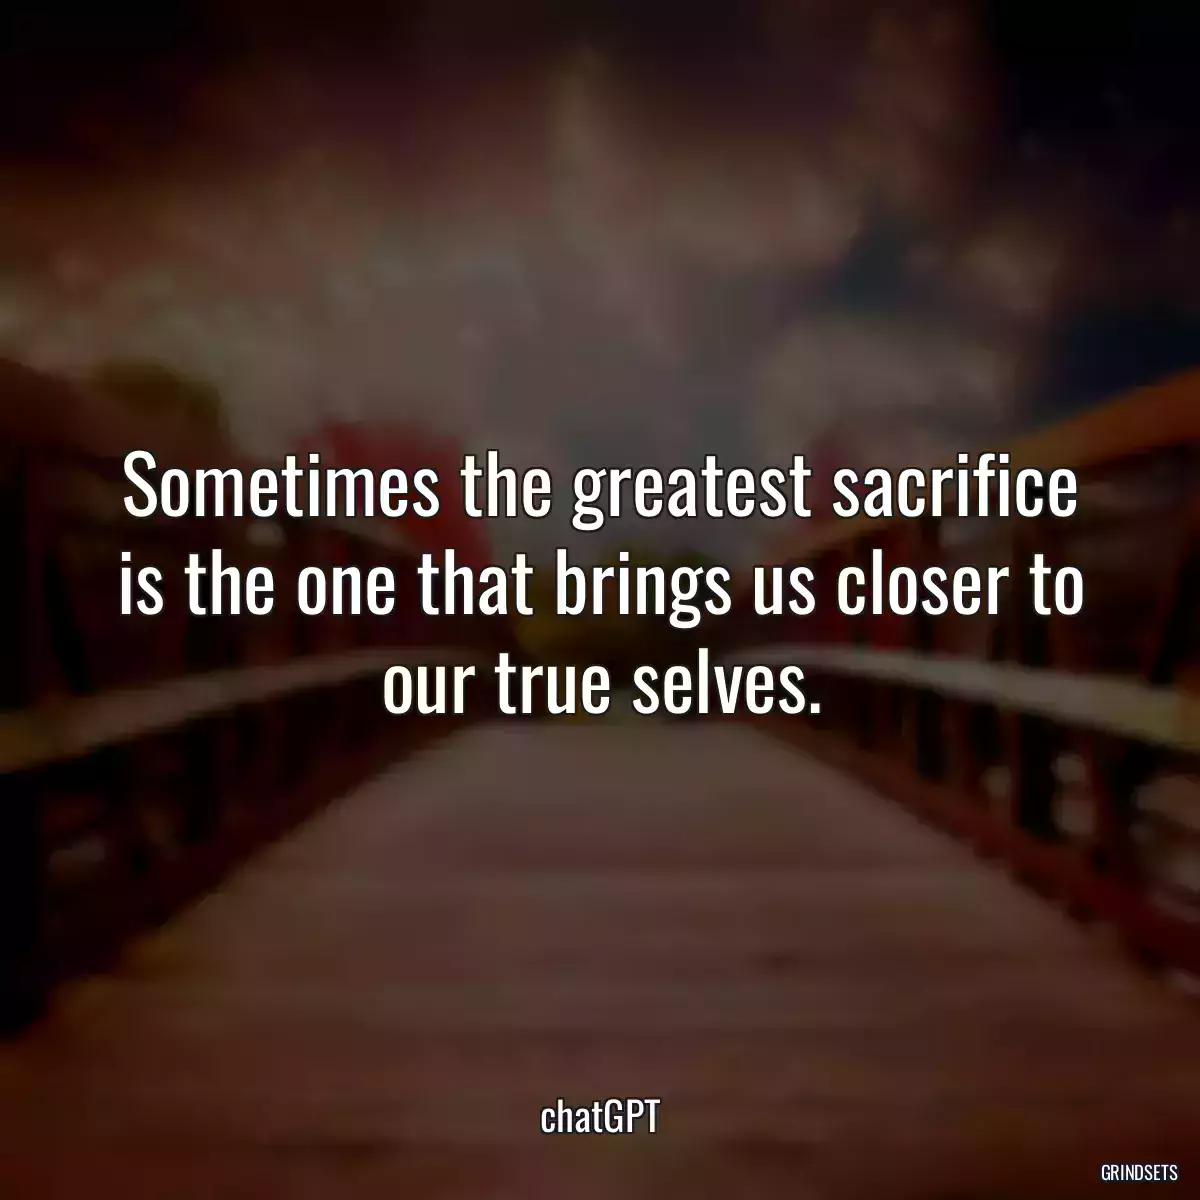 Sometimes the greatest sacrifice is the one that brings us closer to our true selves.